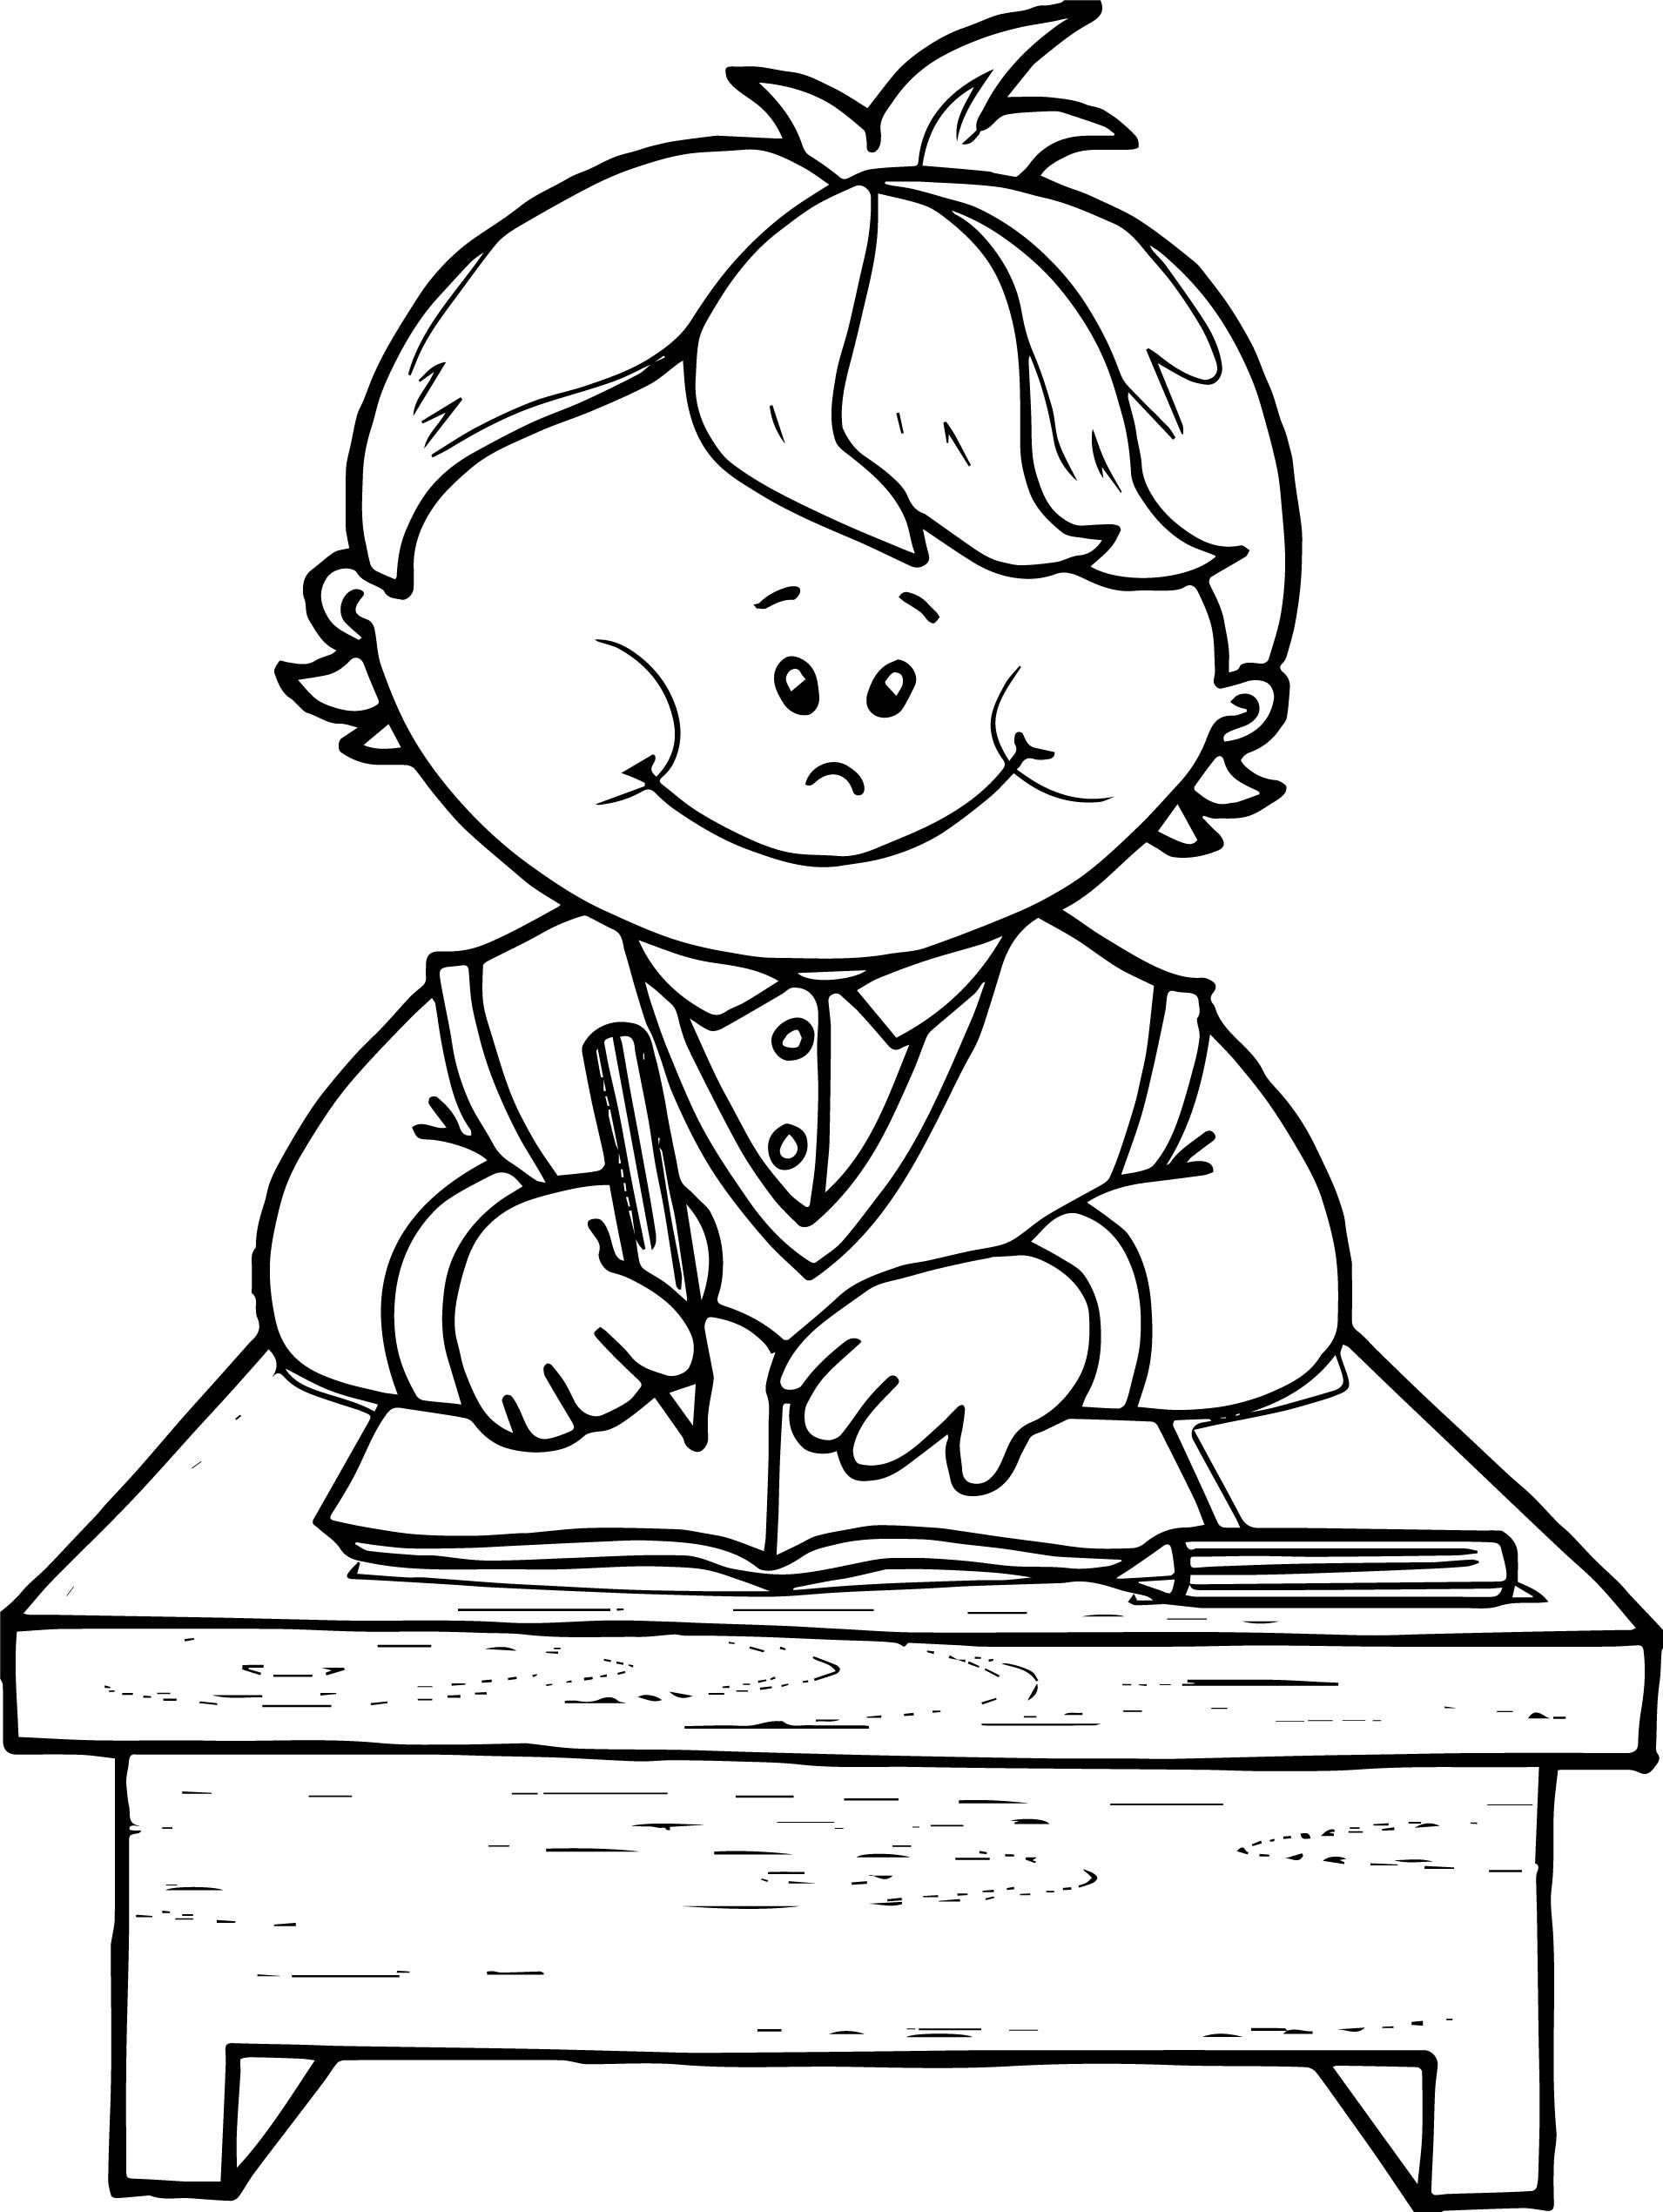 School Boy Write Coloring Page | Dinosaur coloring pages ...